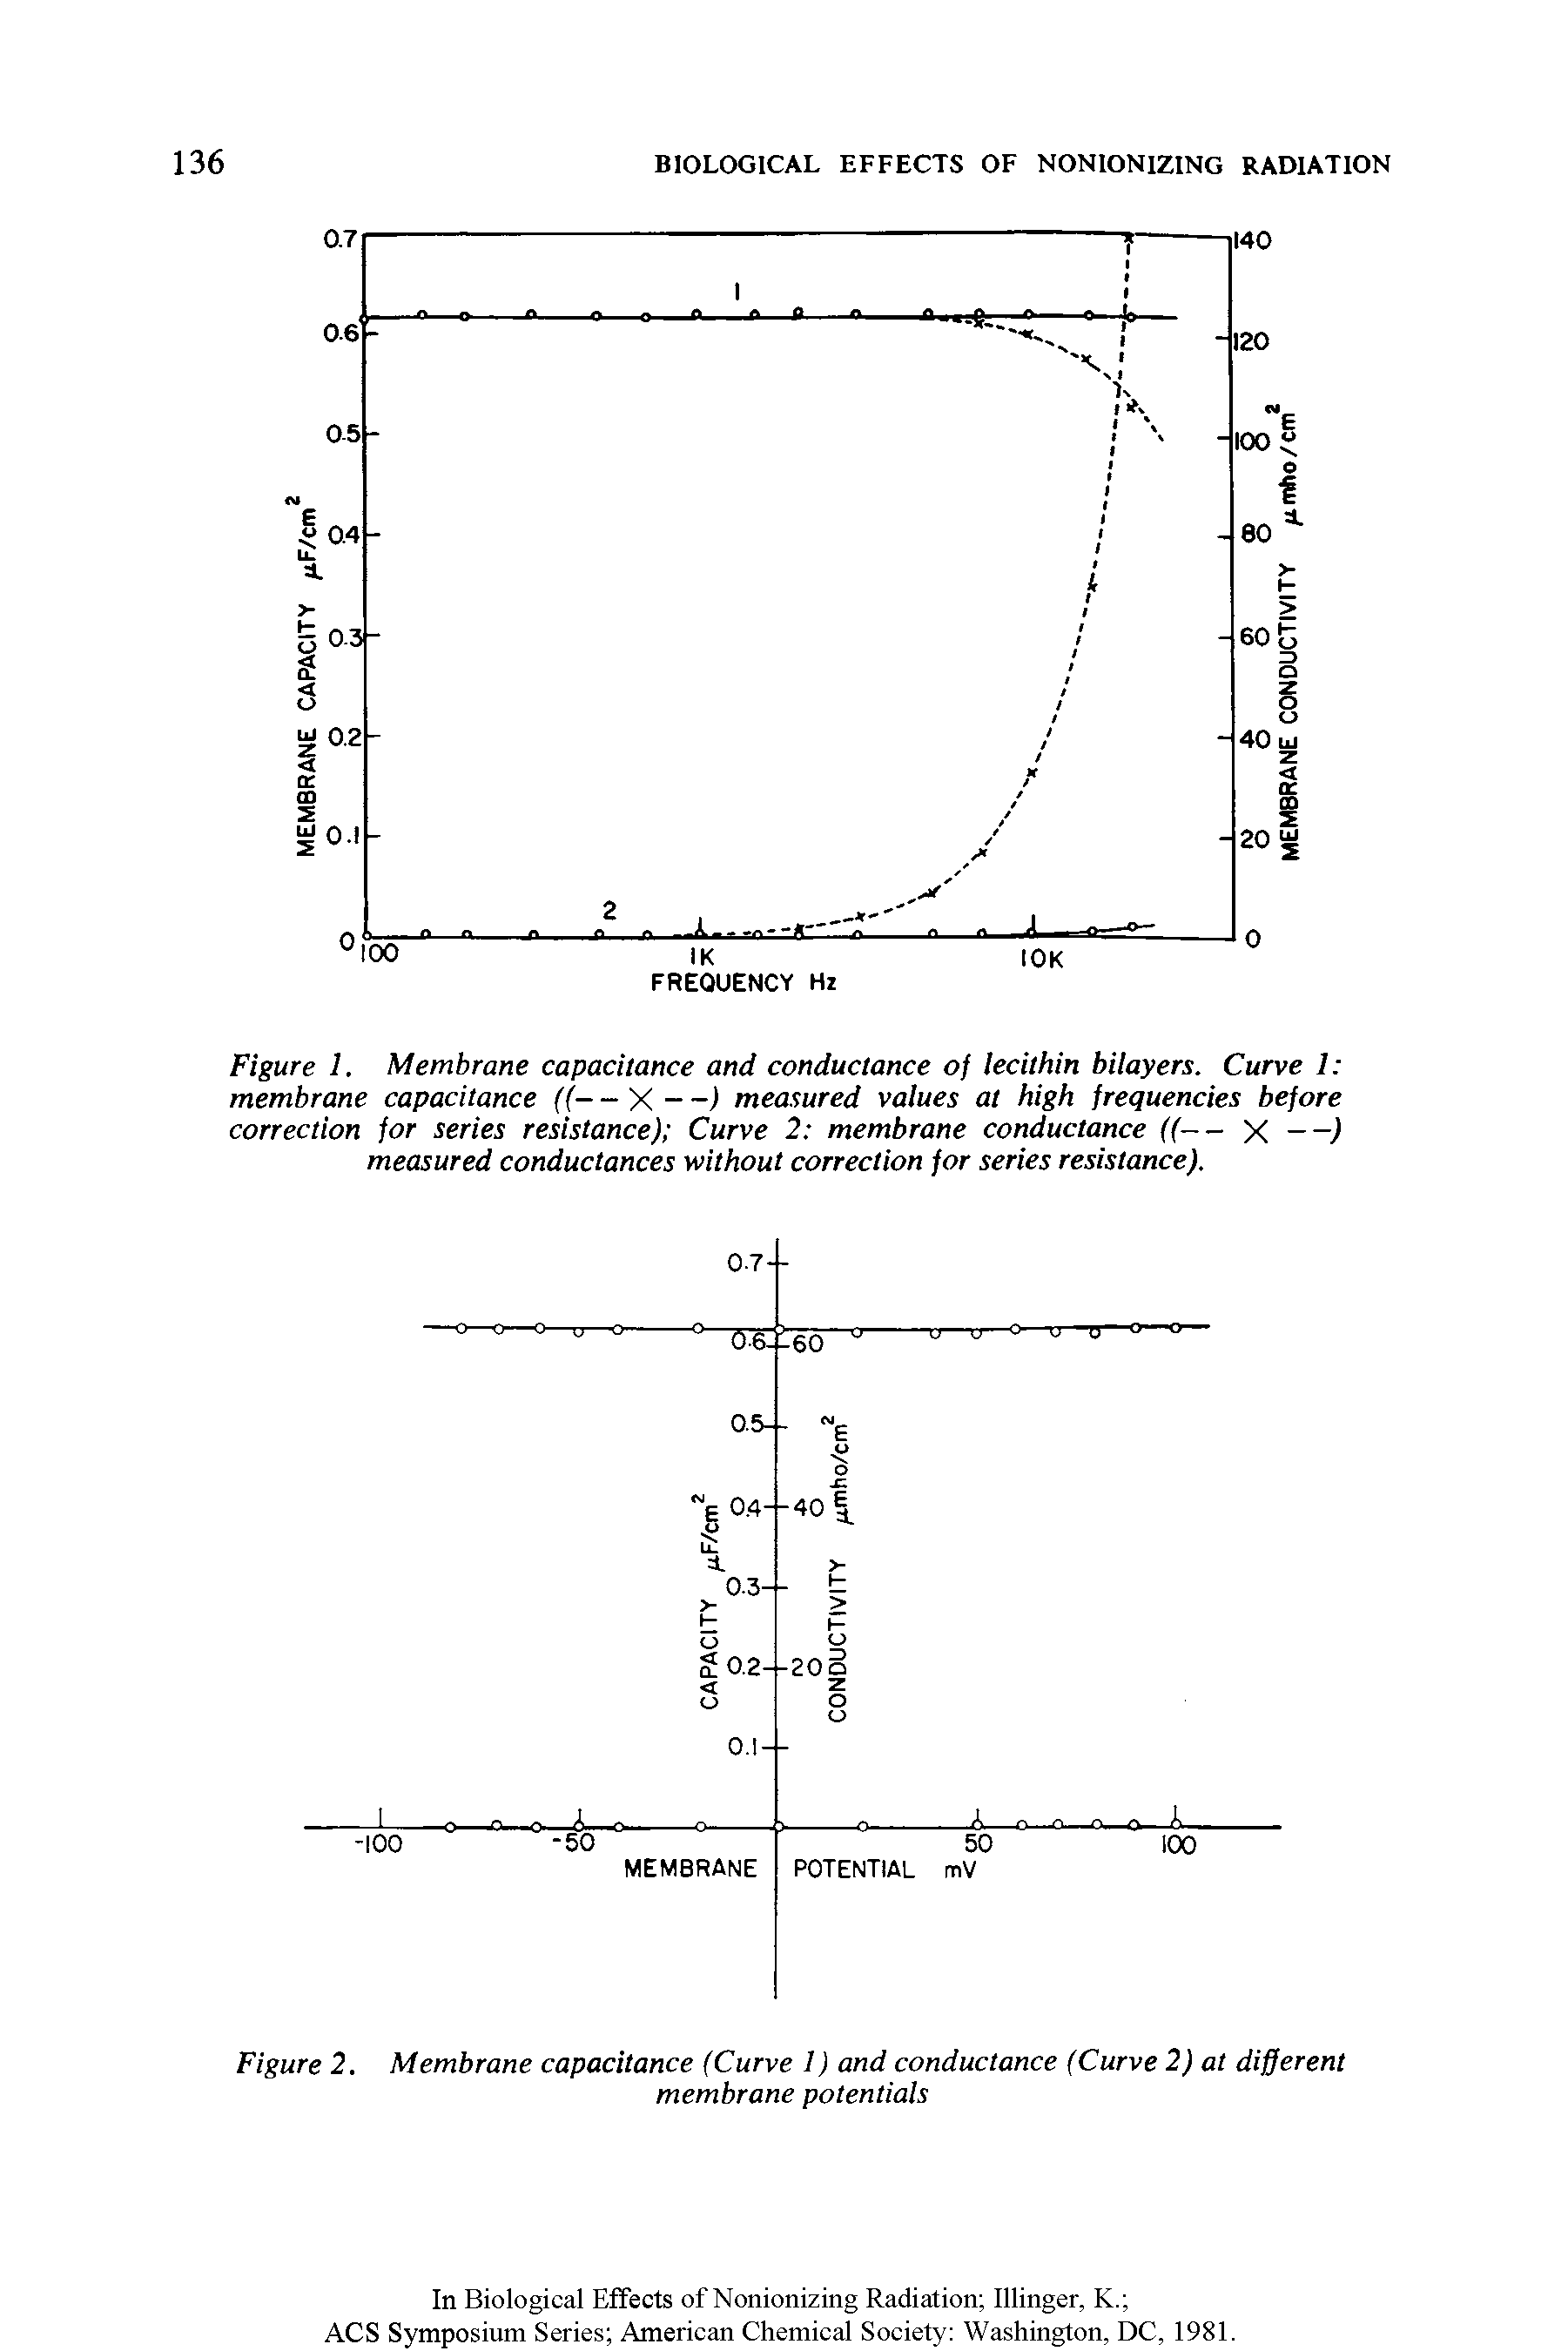 Figure 1. Membrane capacitance and conductance of lecithin bilayers. Curve 1 membrane capacitance ((— X —) measured values at high frequencies before correction for series resistance) Curve 2 membrane conductance ((— X —) measured conductances without correction for series resistance).